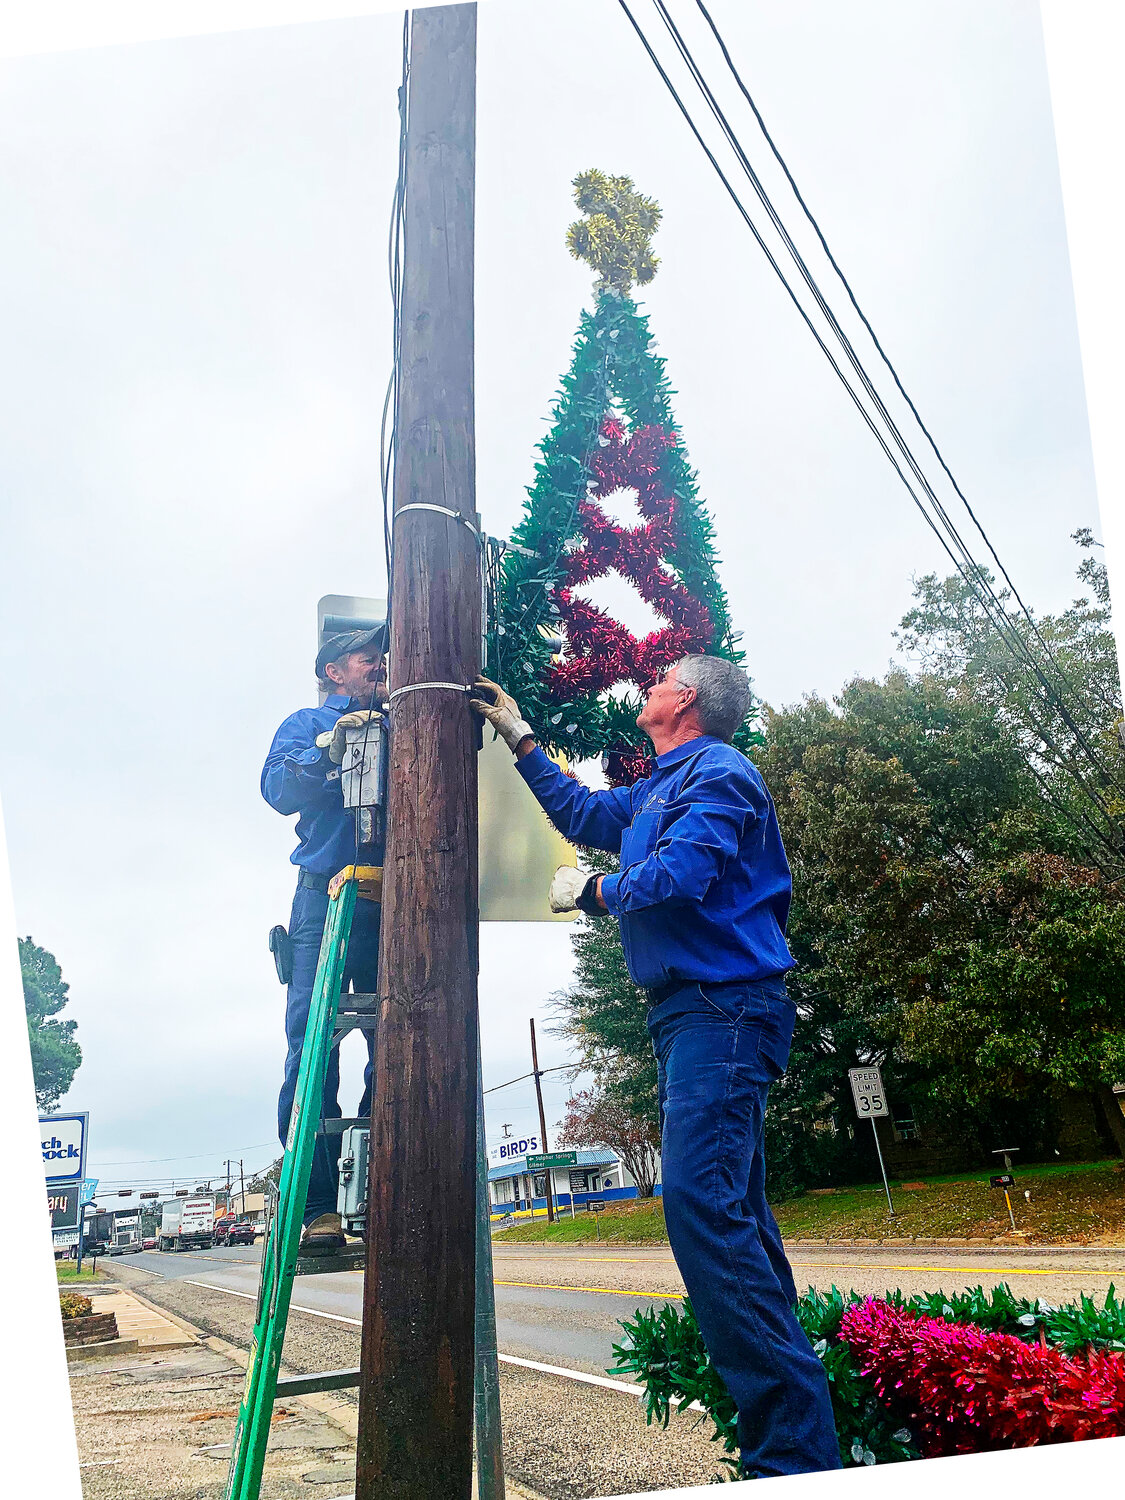 Dee Gilbreath and Mitch Walls place holiday decorations along Main St. in Quitman last week. (Monitor photo by Lesa Major)